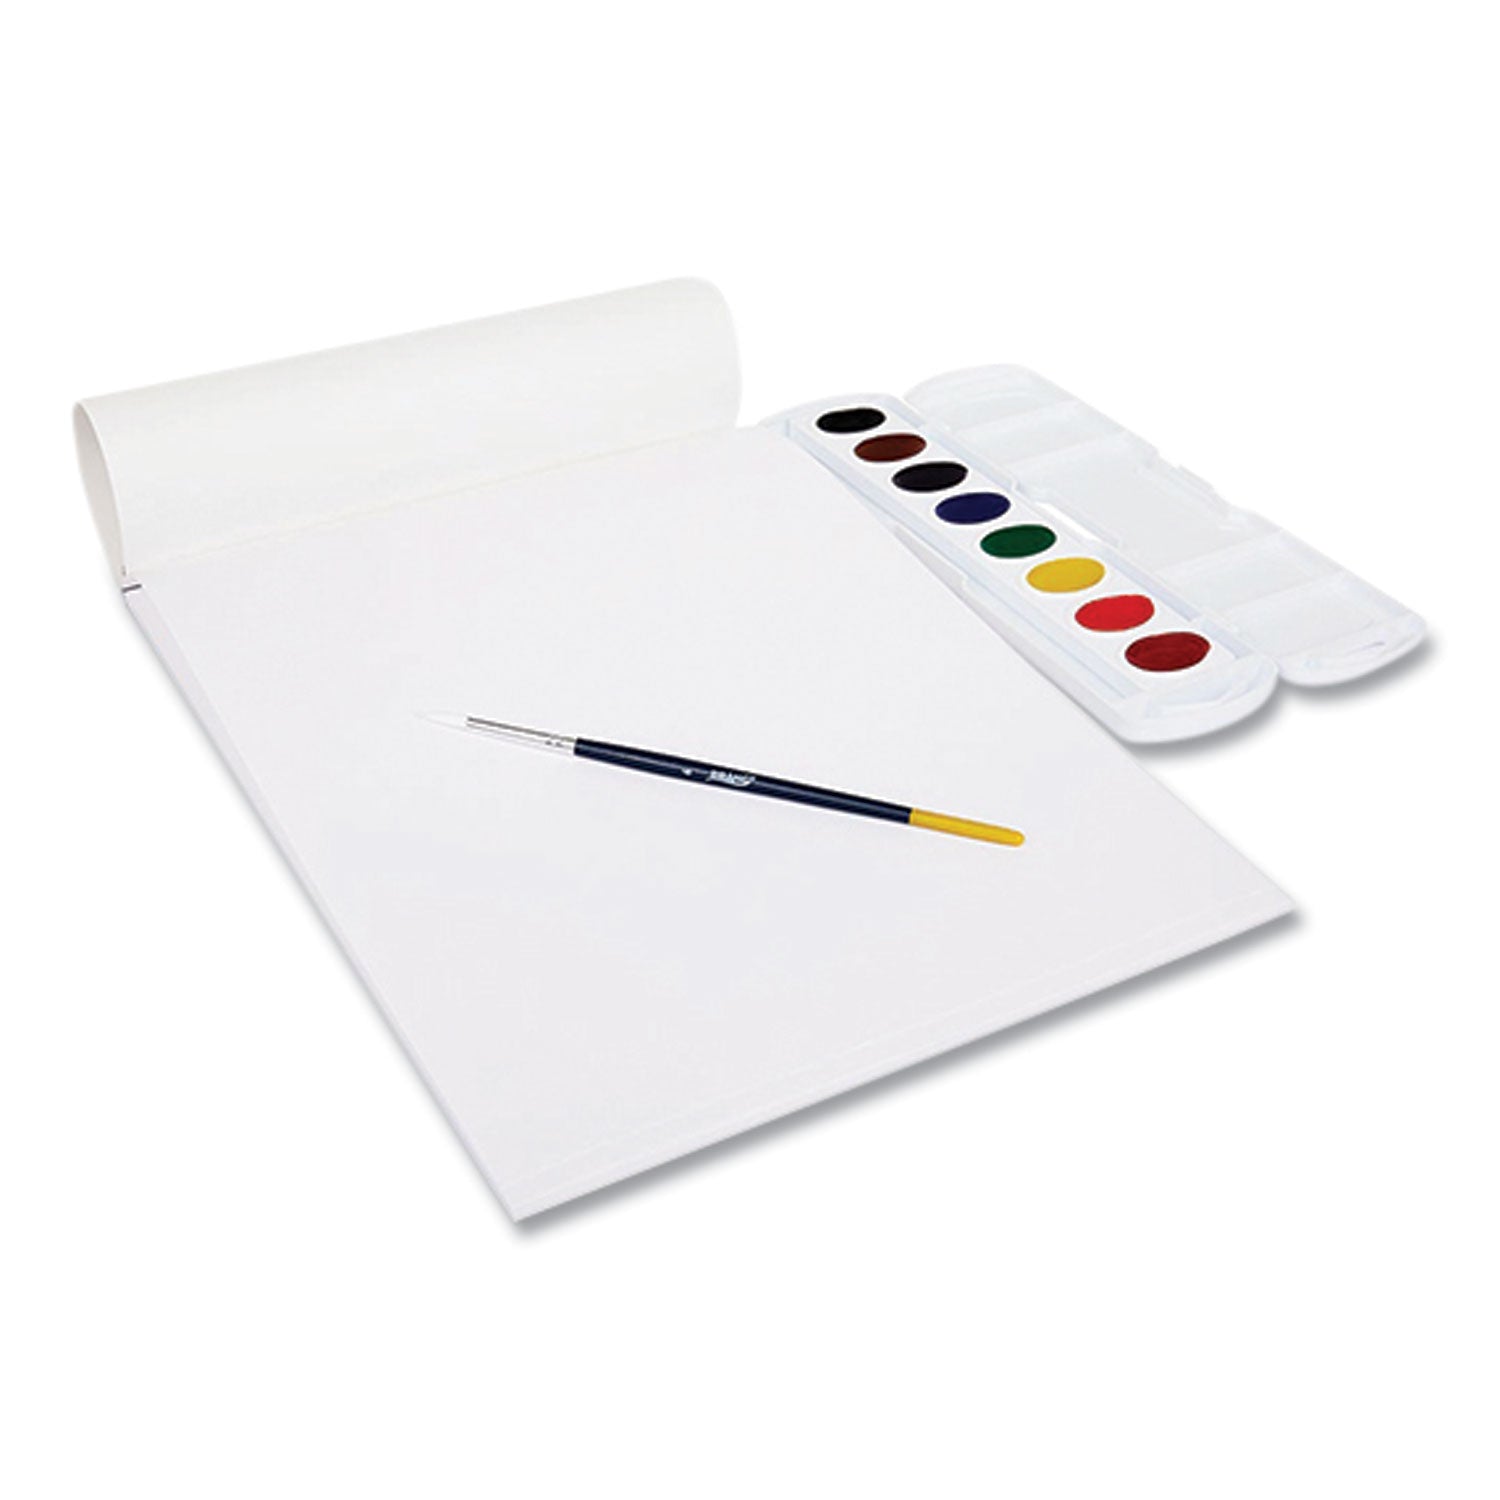 prang-watercolor-paper-pad-unruled-white-multicolor-cover-30-white-9-x-12-sheets_dixp2367 - 2